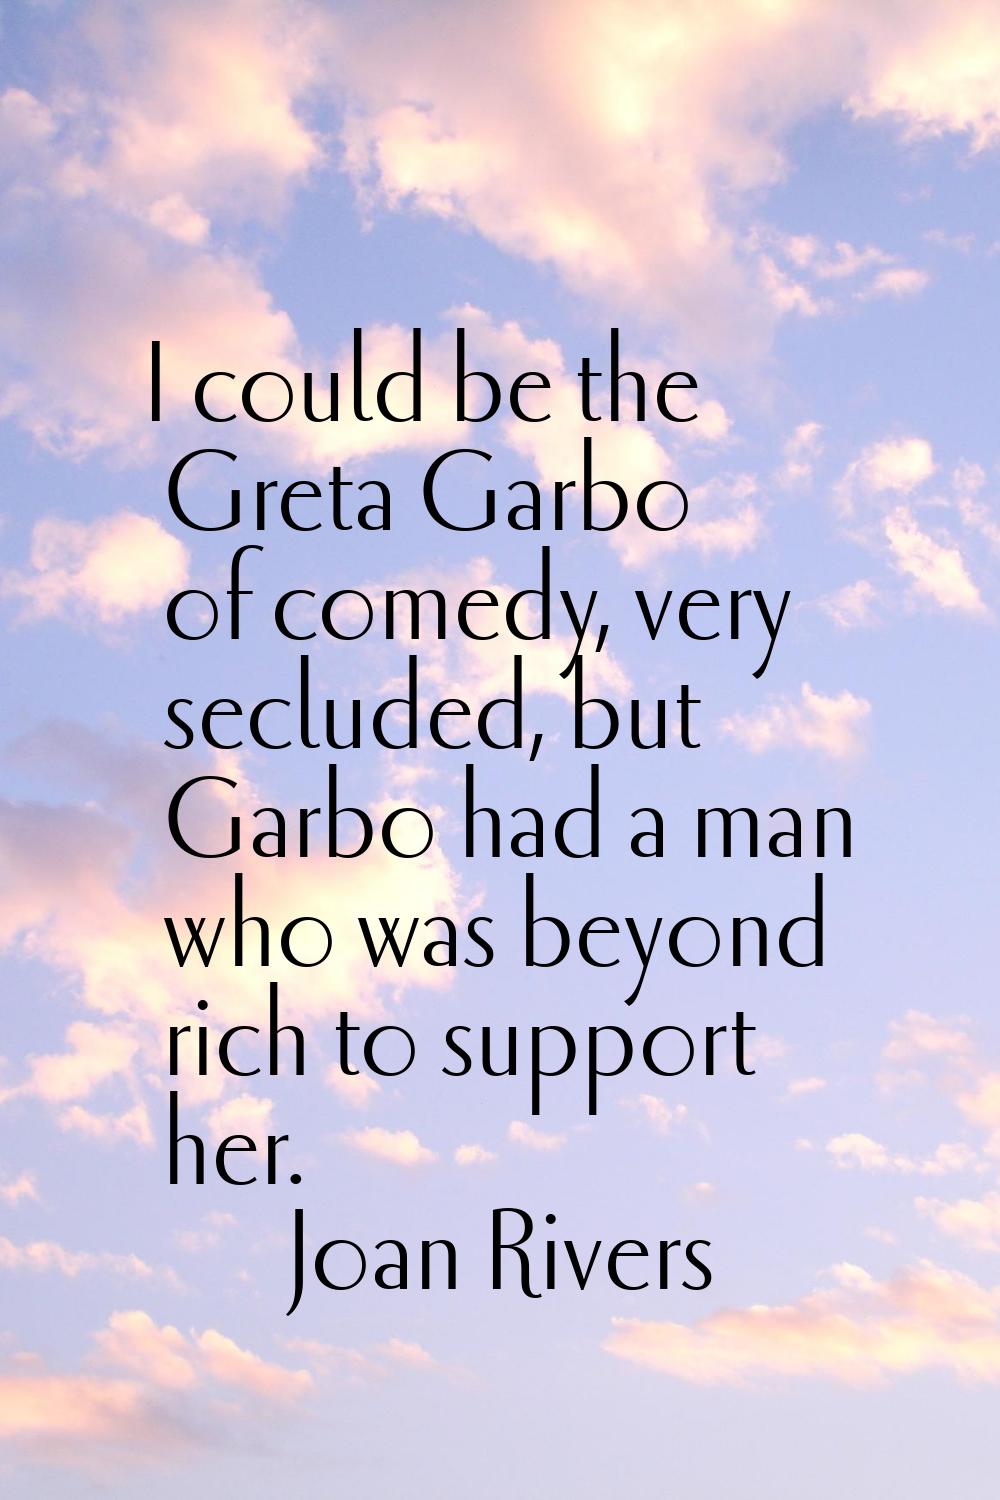 I could be the Greta Garbo of comedy, very secluded, but Garbo had a man who was beyond rich to sup